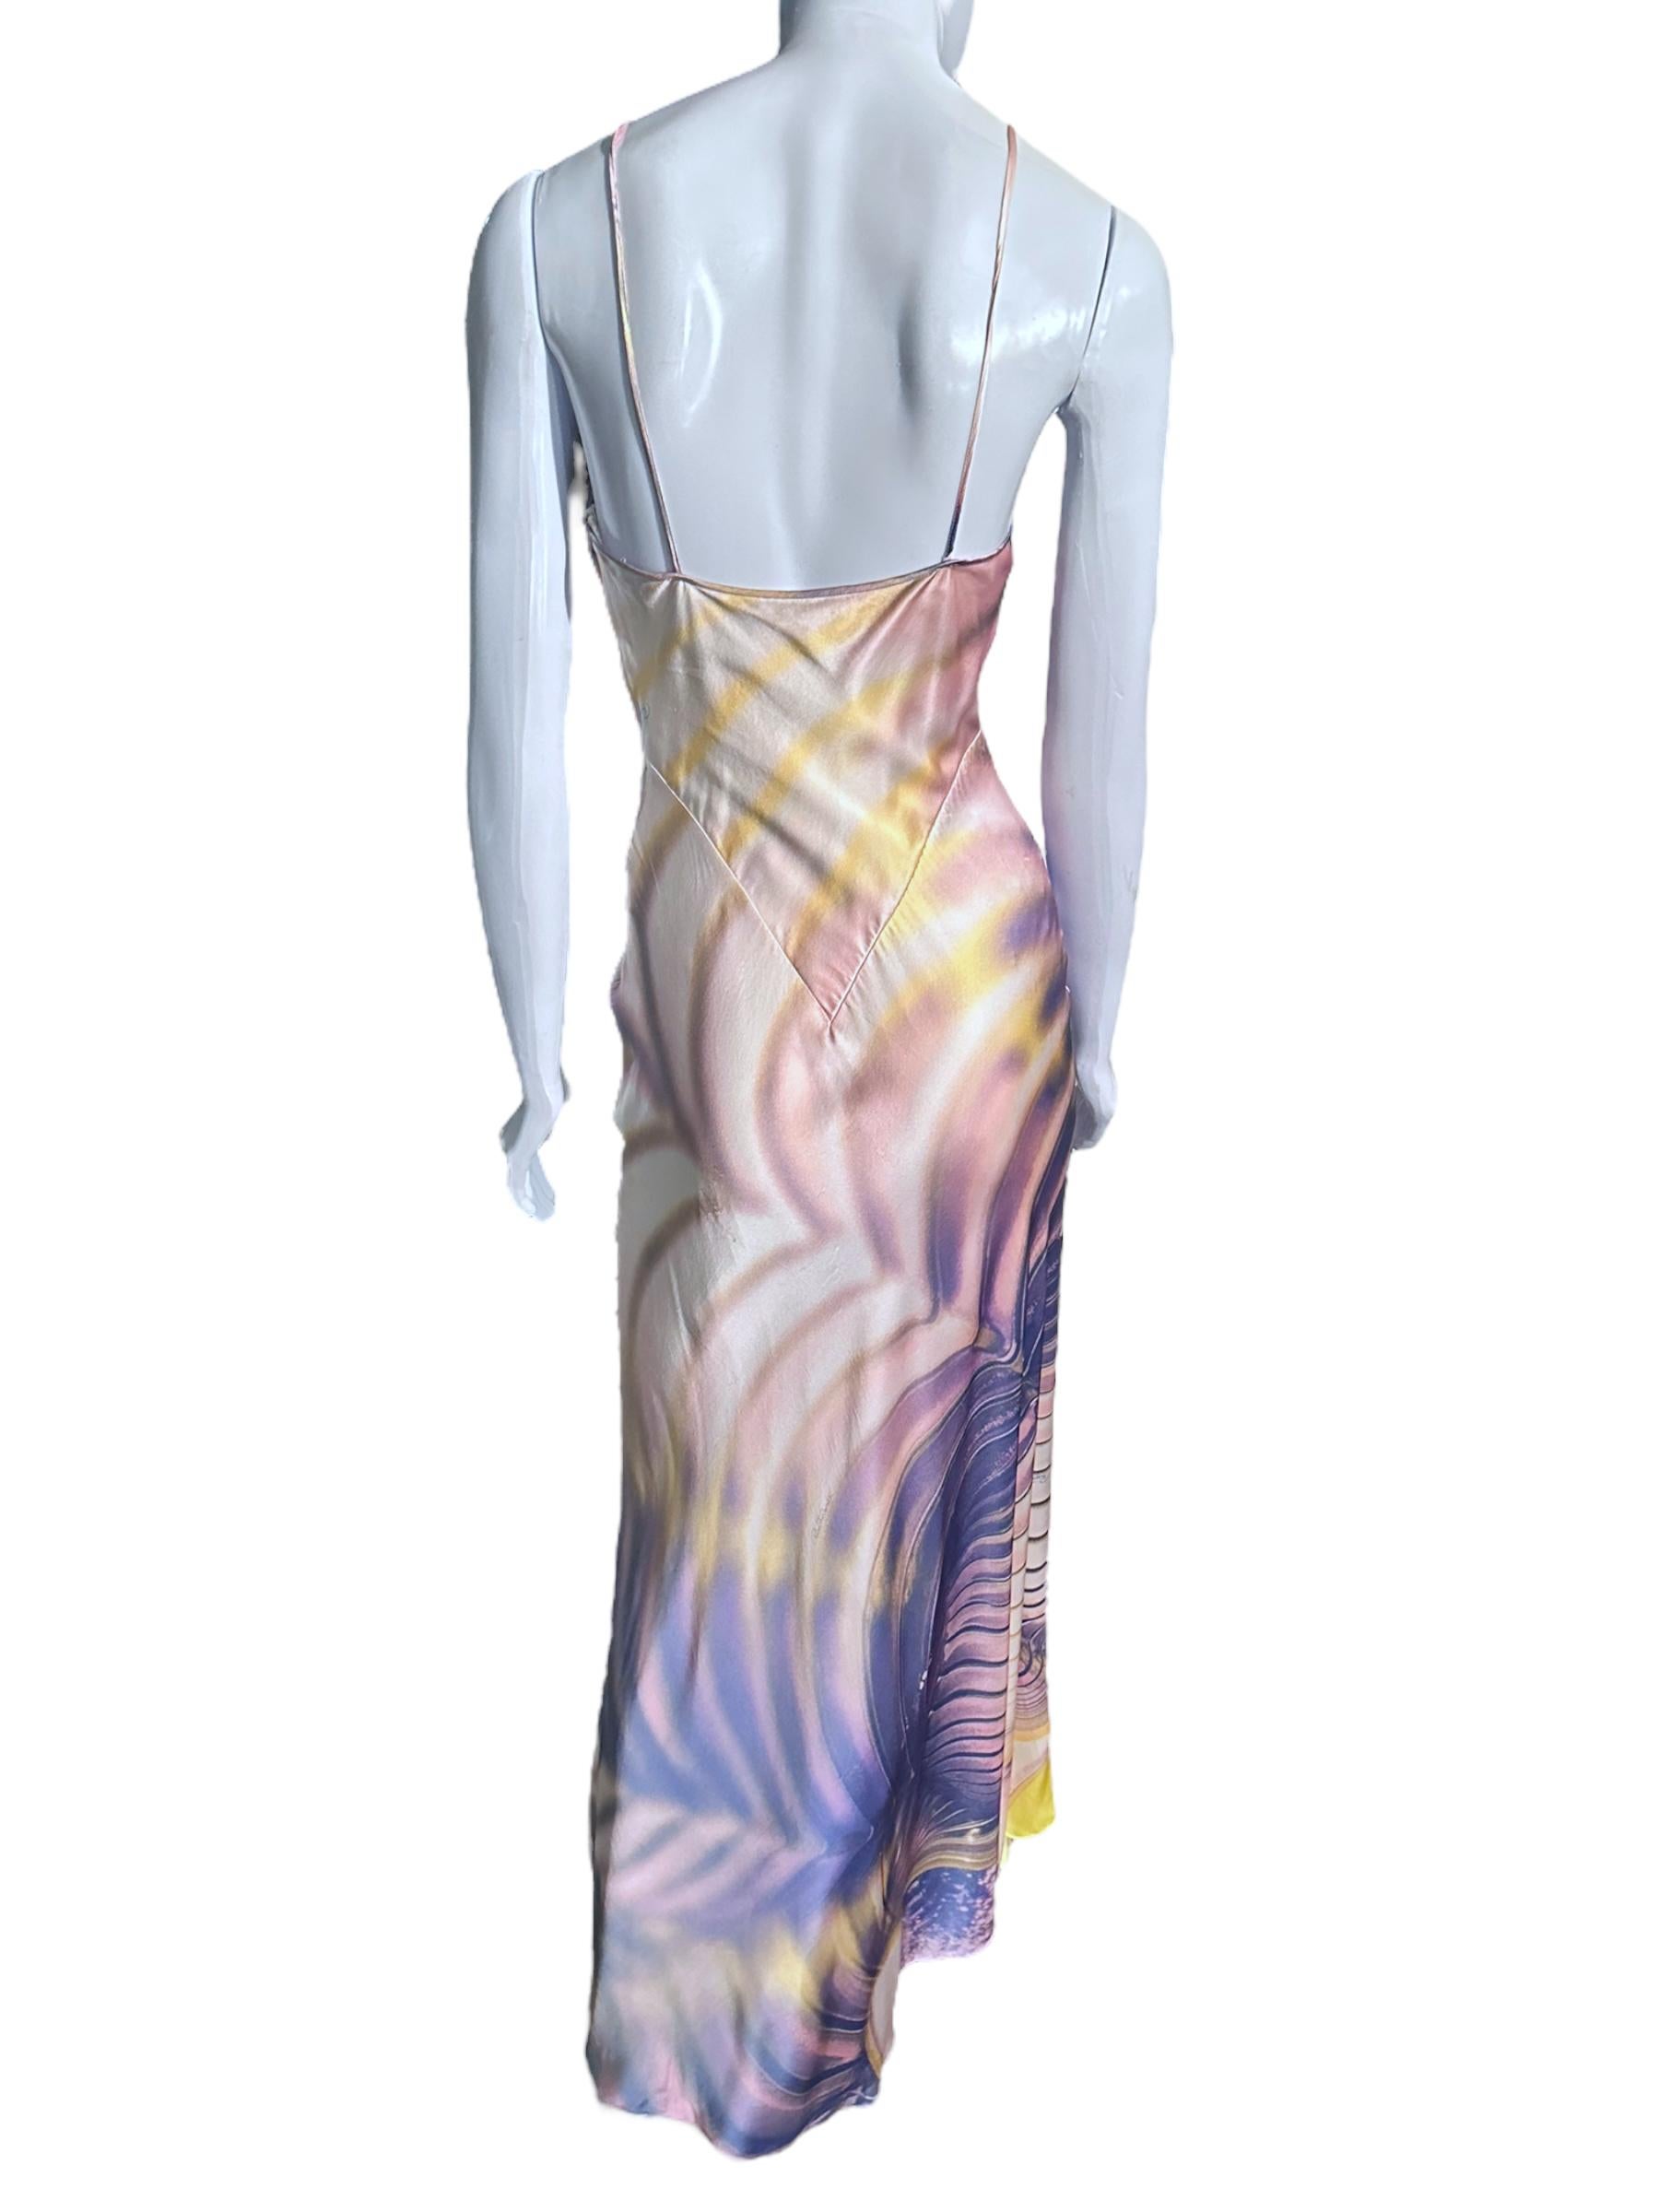 Roberto Cavalli Iconic Ss 2001 Psychedelic Print Cowl Neck Bias-Cut Silk Dress For Sale 5